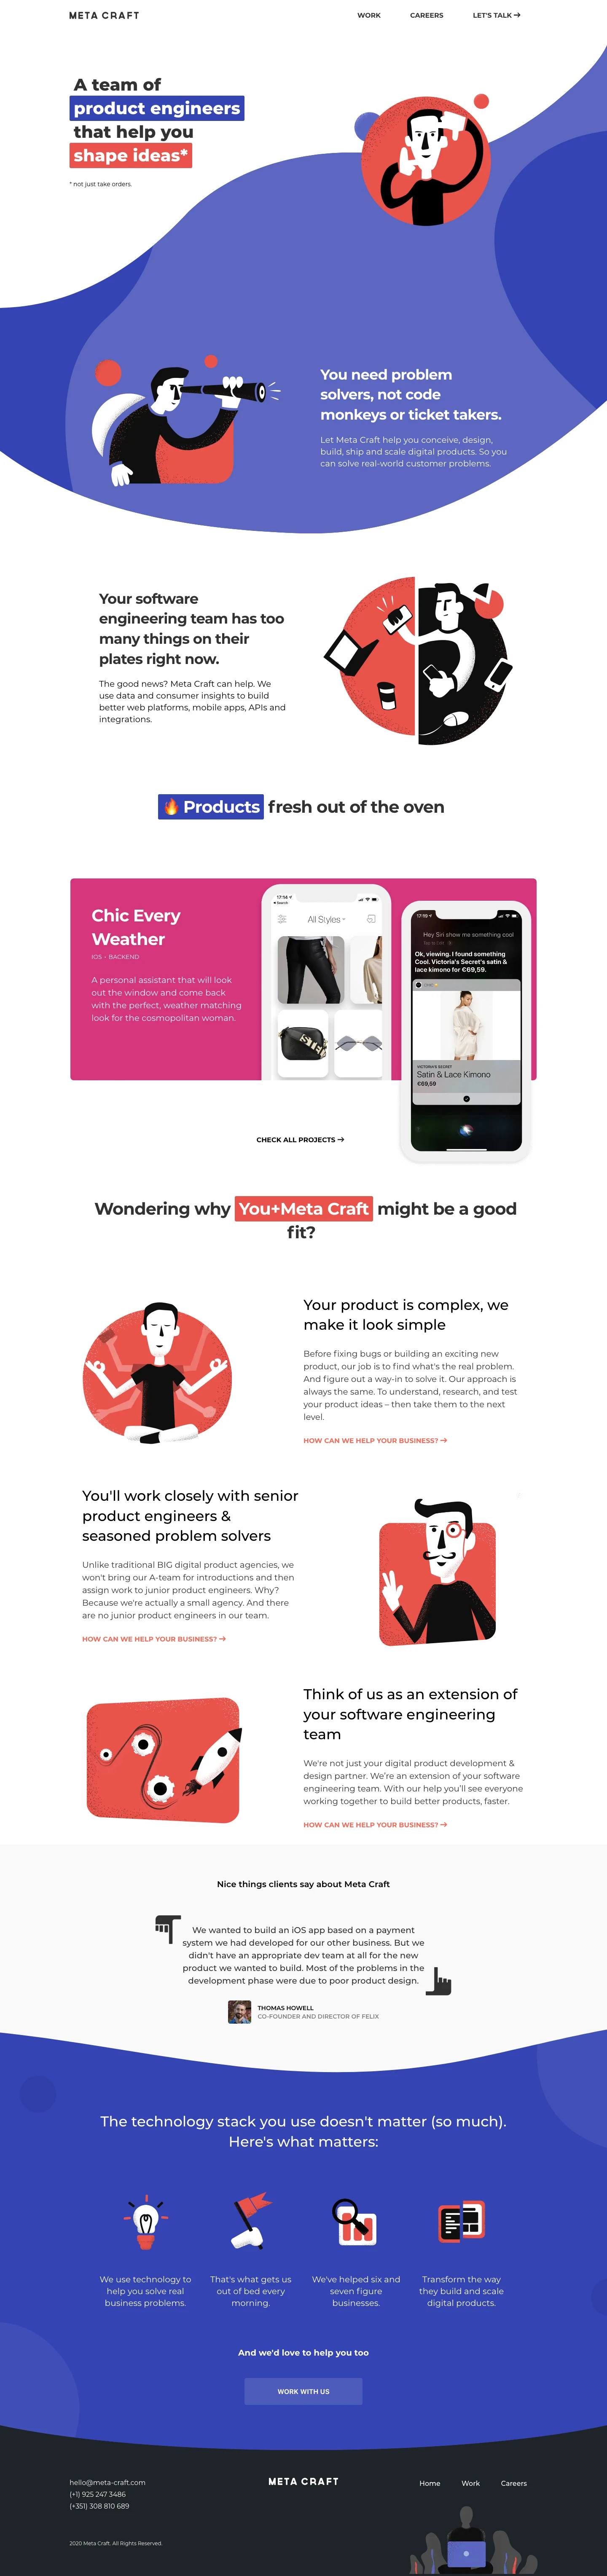 Meta Craft Landing Page Example: Looking for smart, helpful and patient product engineers to help you shape ideas and turn them into fully working products? Let’s talk.